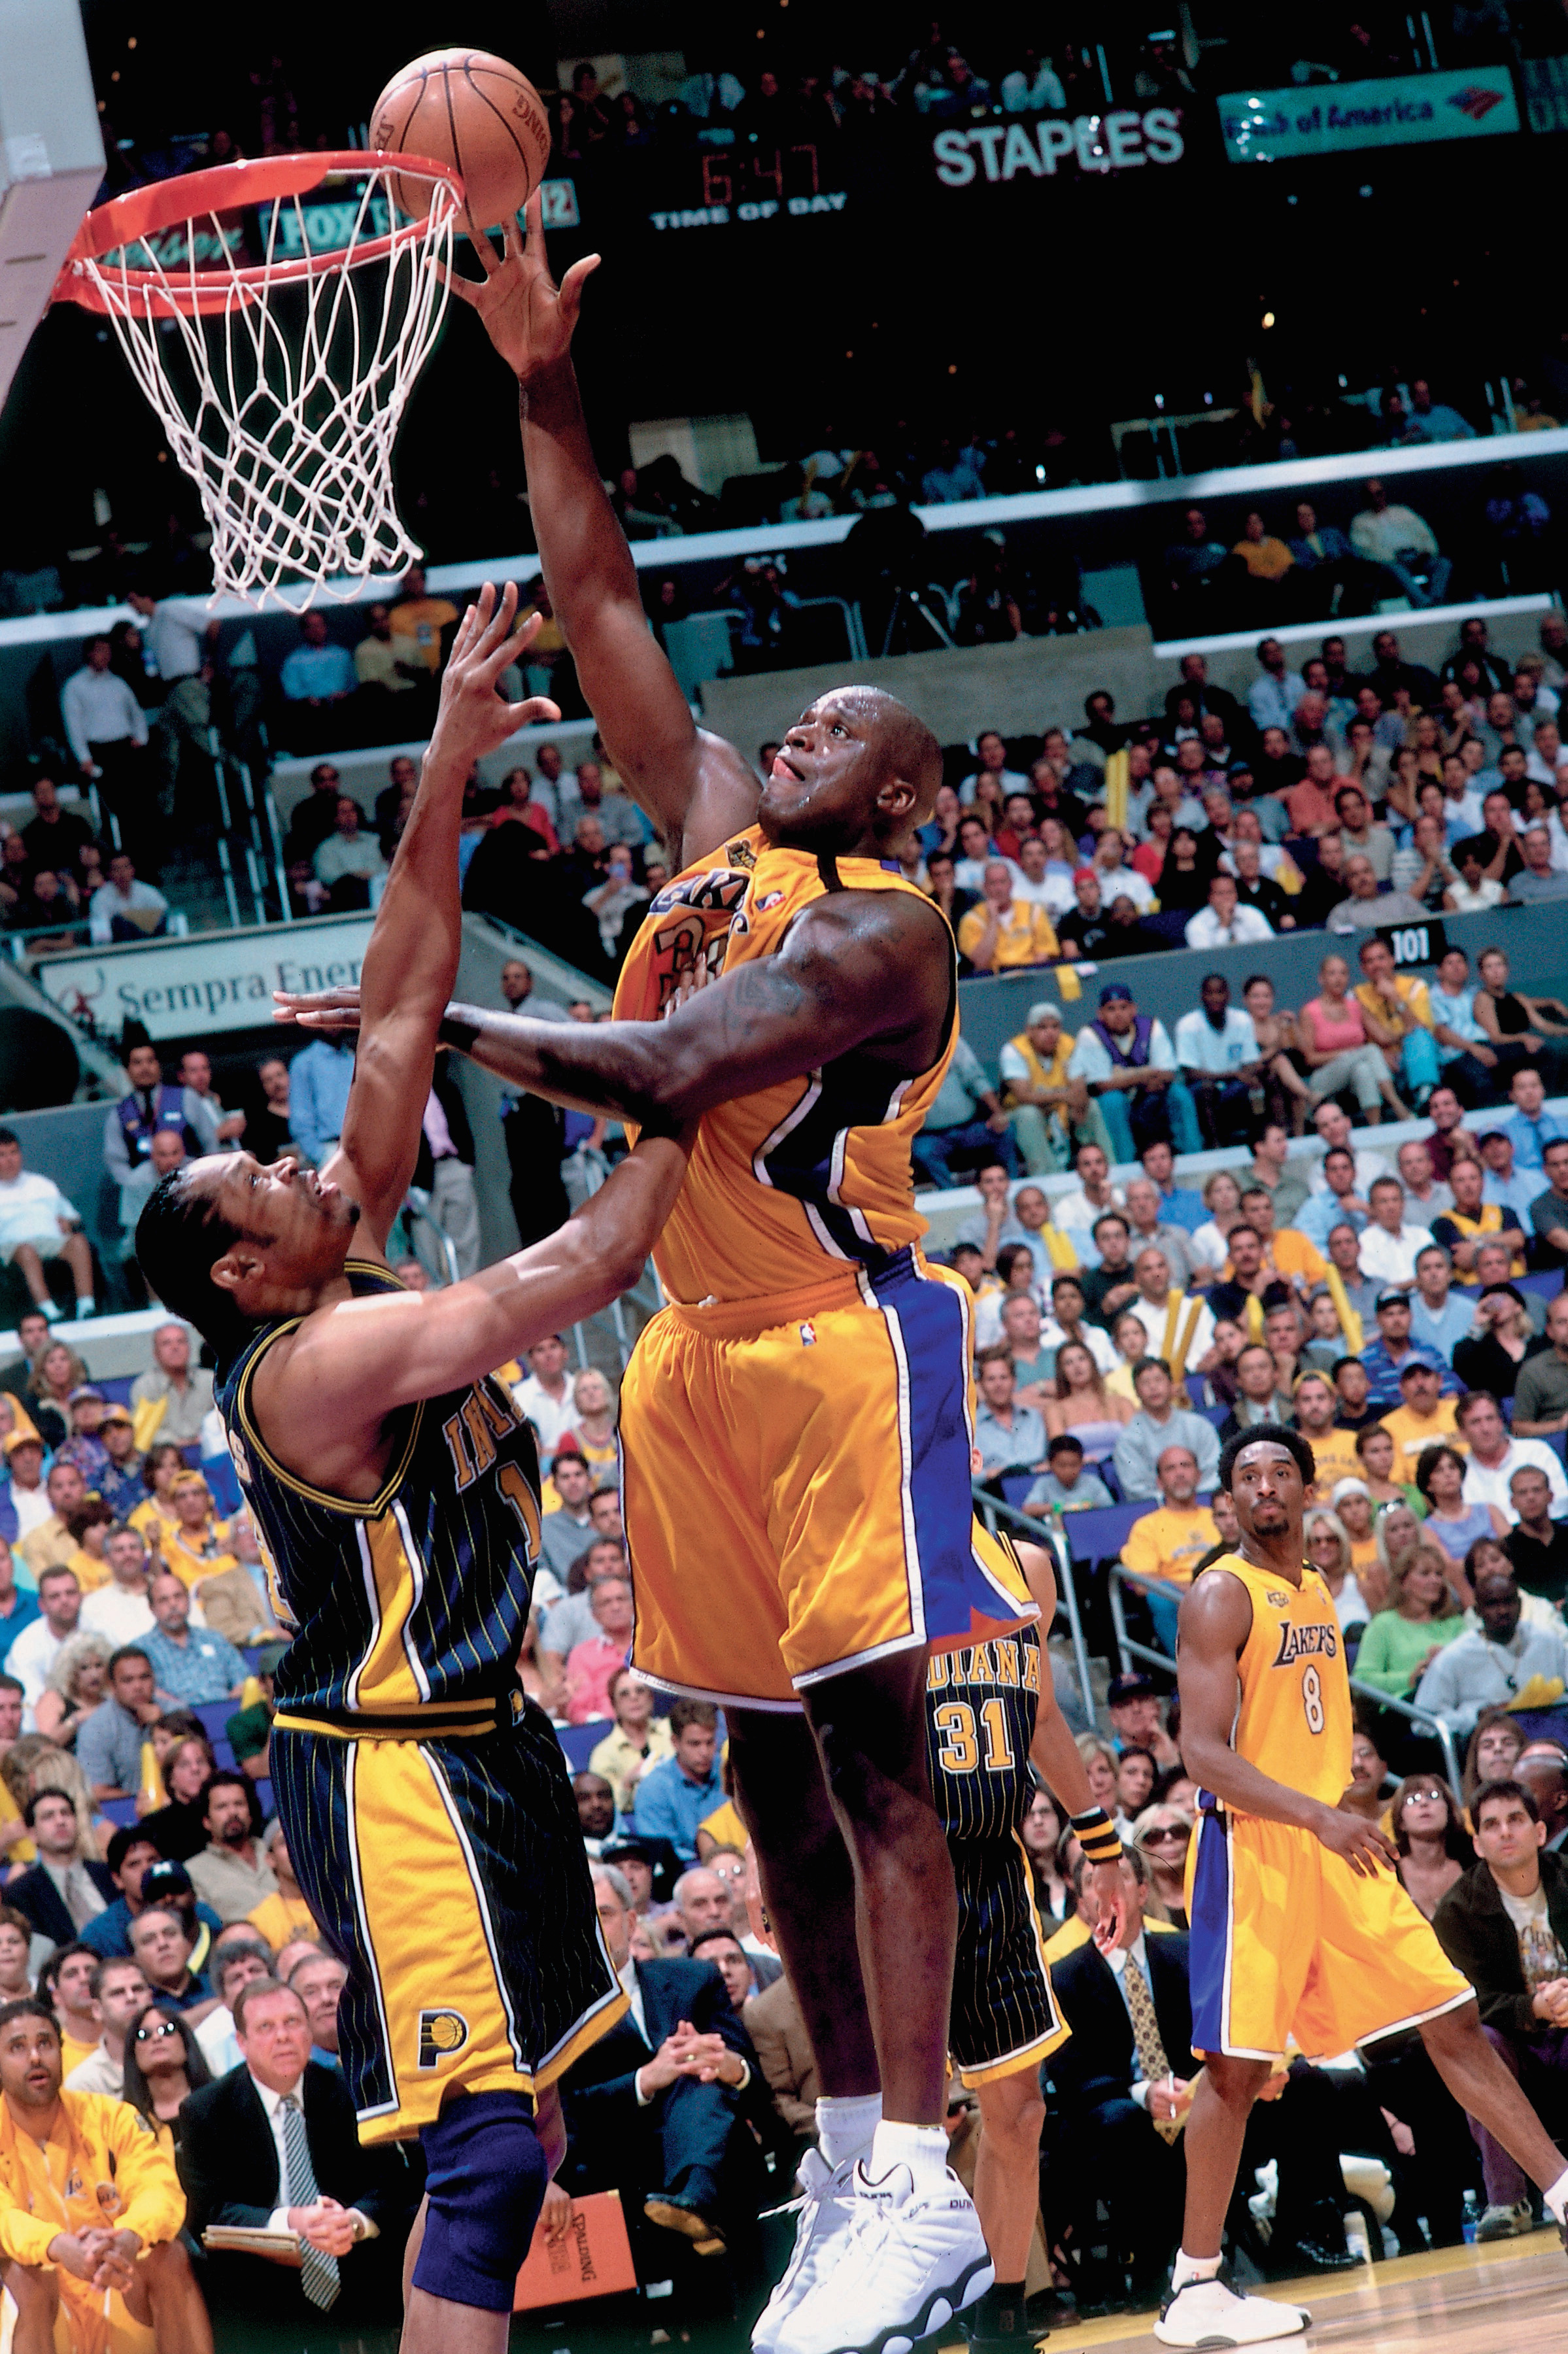 Shaquille O'Neal #34 of the Los Angeles Lakers attempts a layup against Sam Perkins #14 of the Indiana Pacers during Game 6 of the 2000 NBA Finals on June 19, 2000 at the Staples Center in Los Angeles, California.